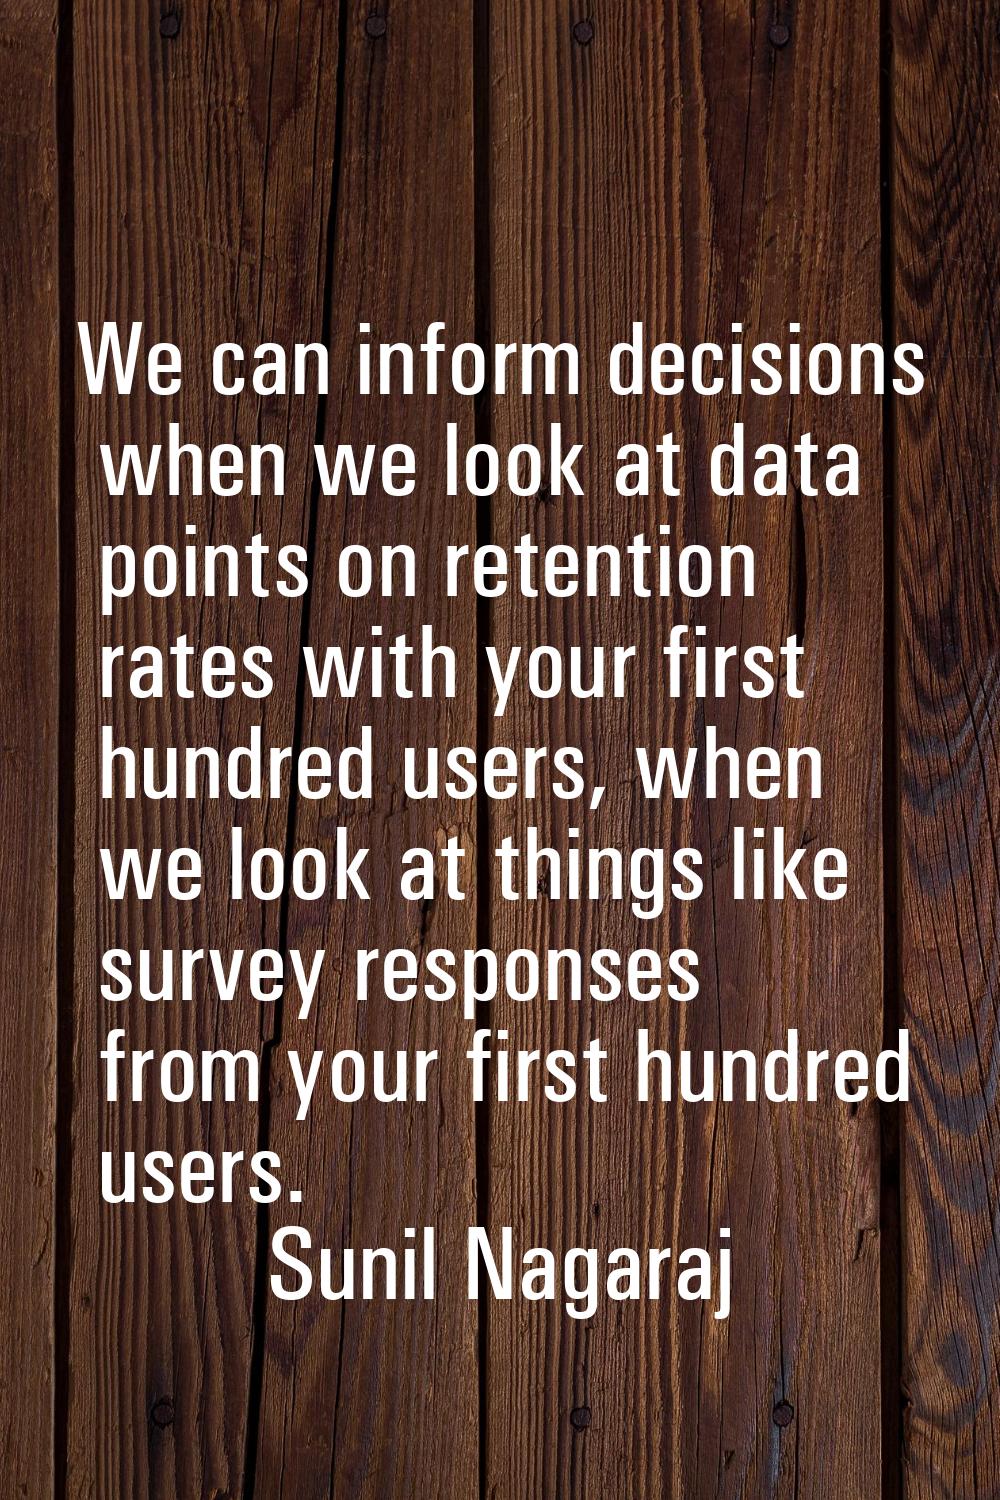 We can inform decisions when we look at data points on retention rates with your first hundred user